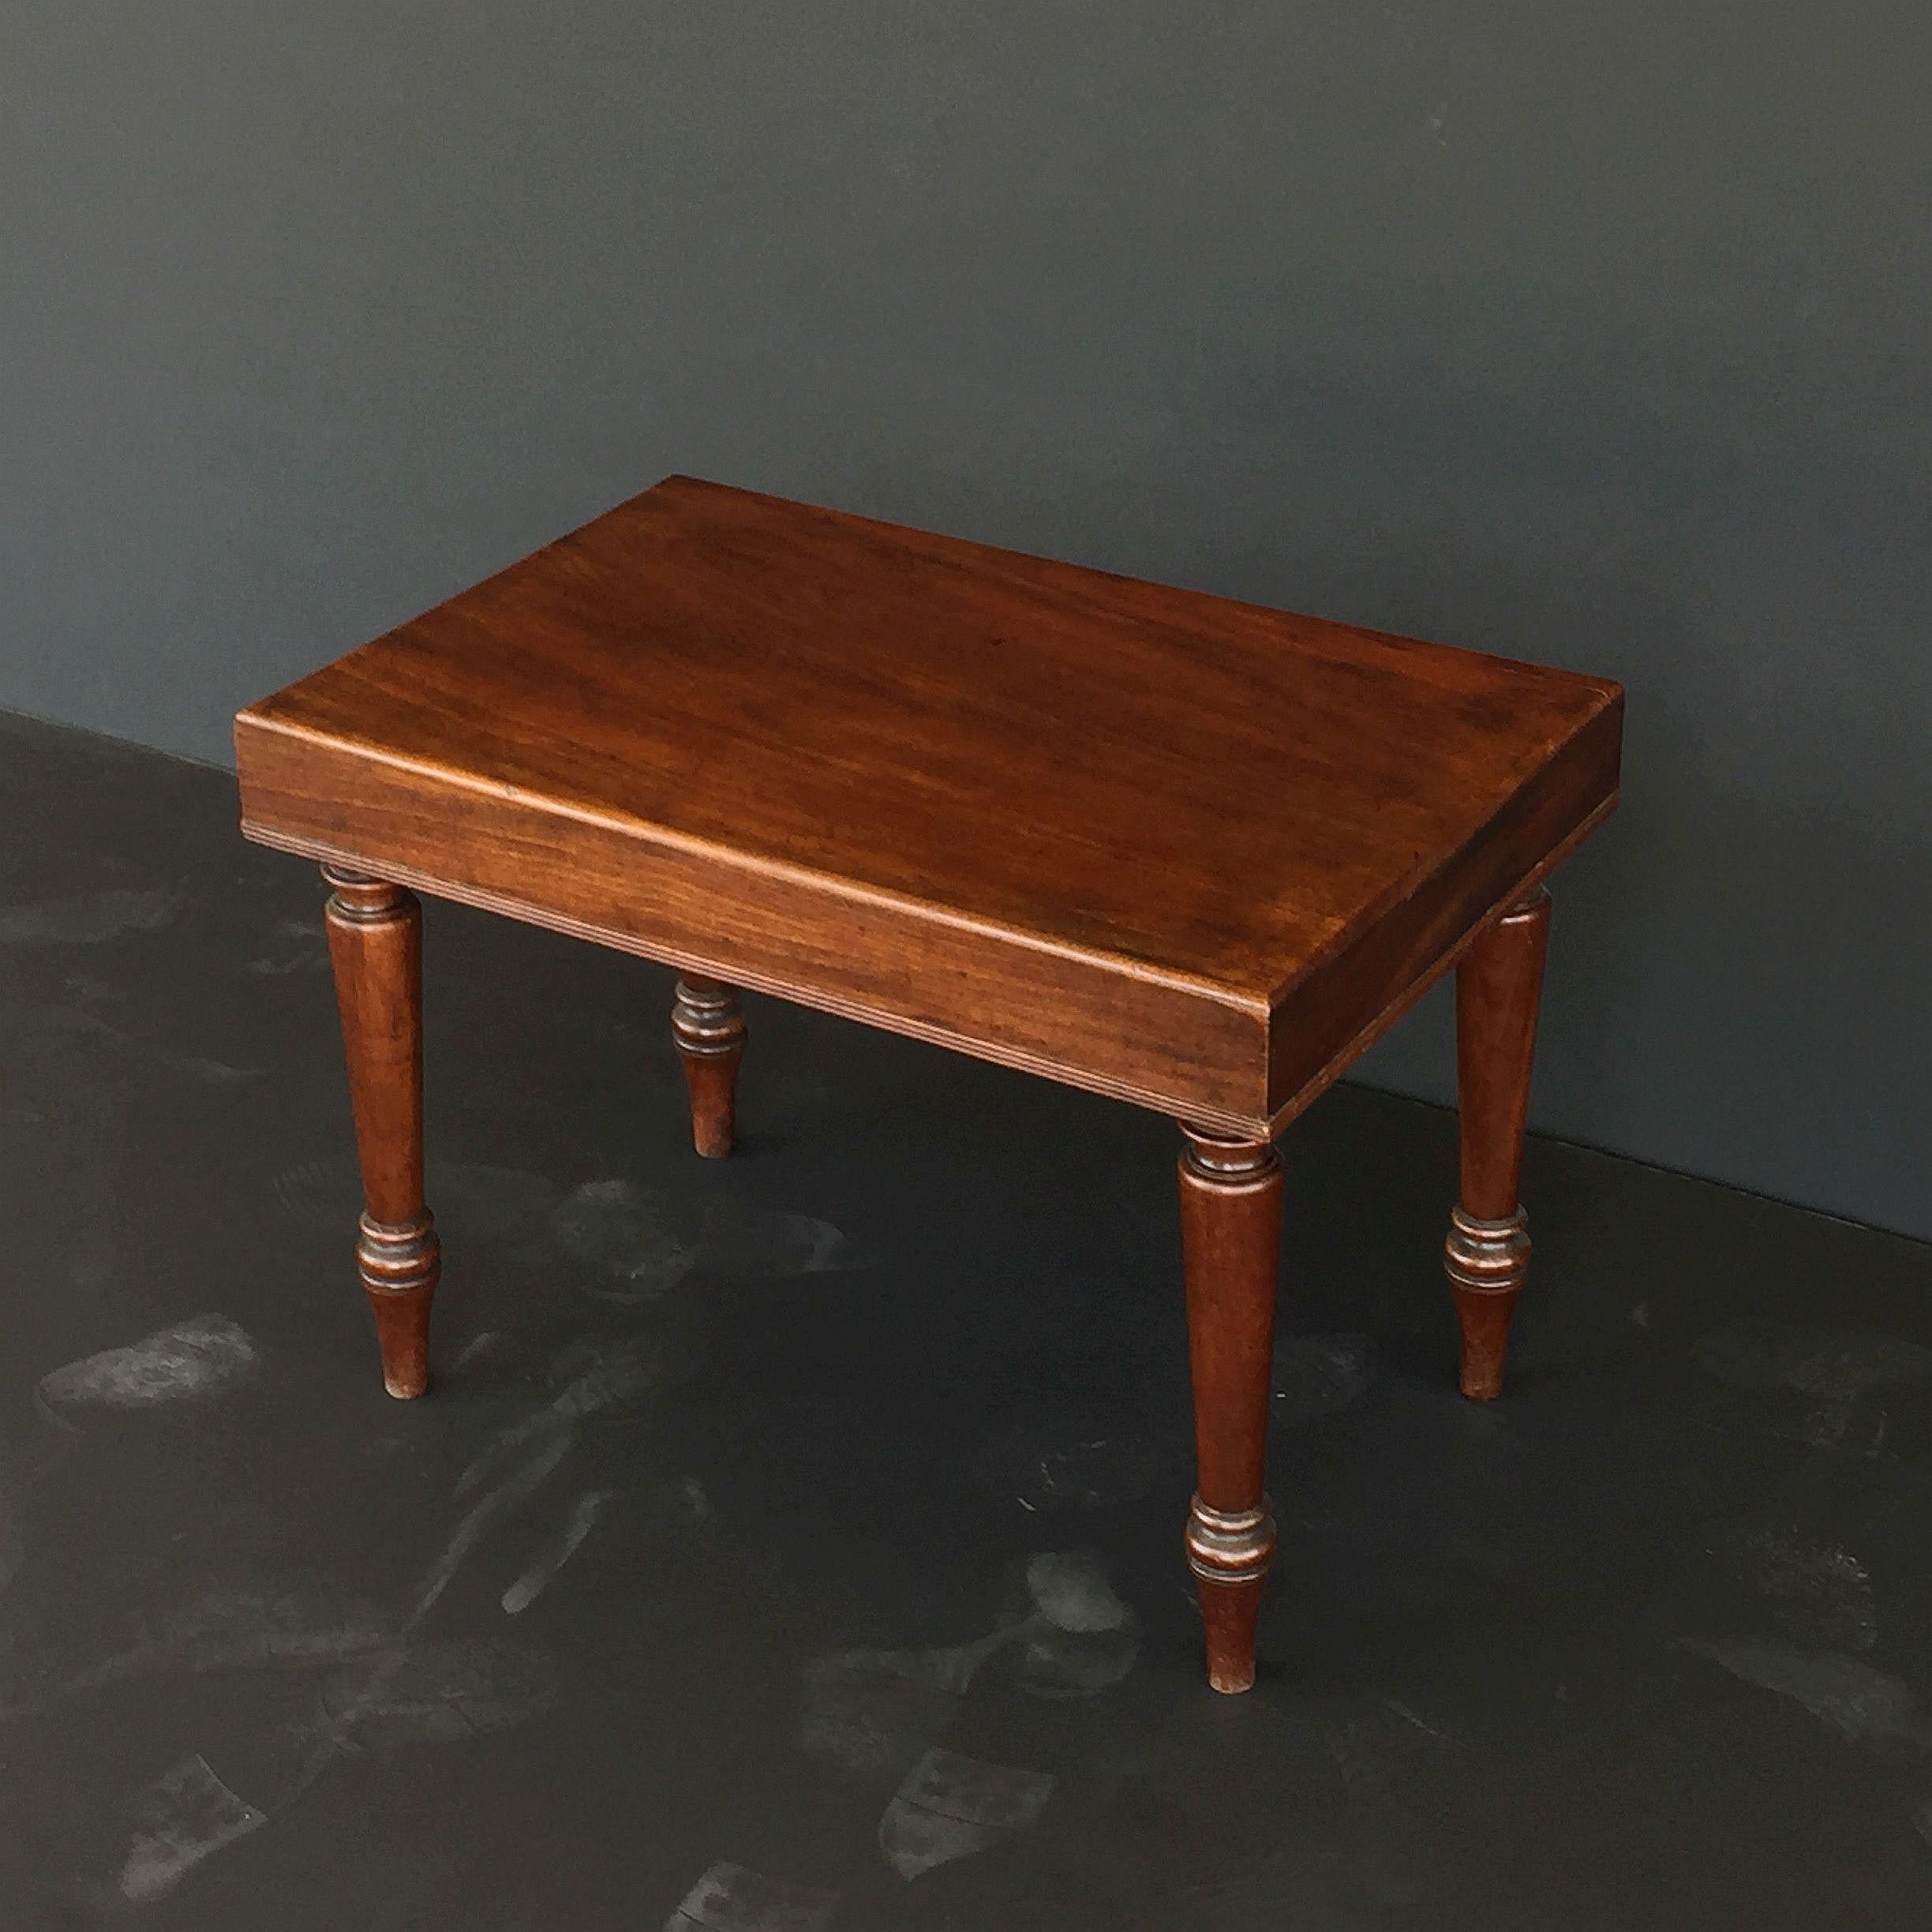 A fine English side or end table of mahogany from the 19th century, featuring a moulded rectangular top on four turned legs.